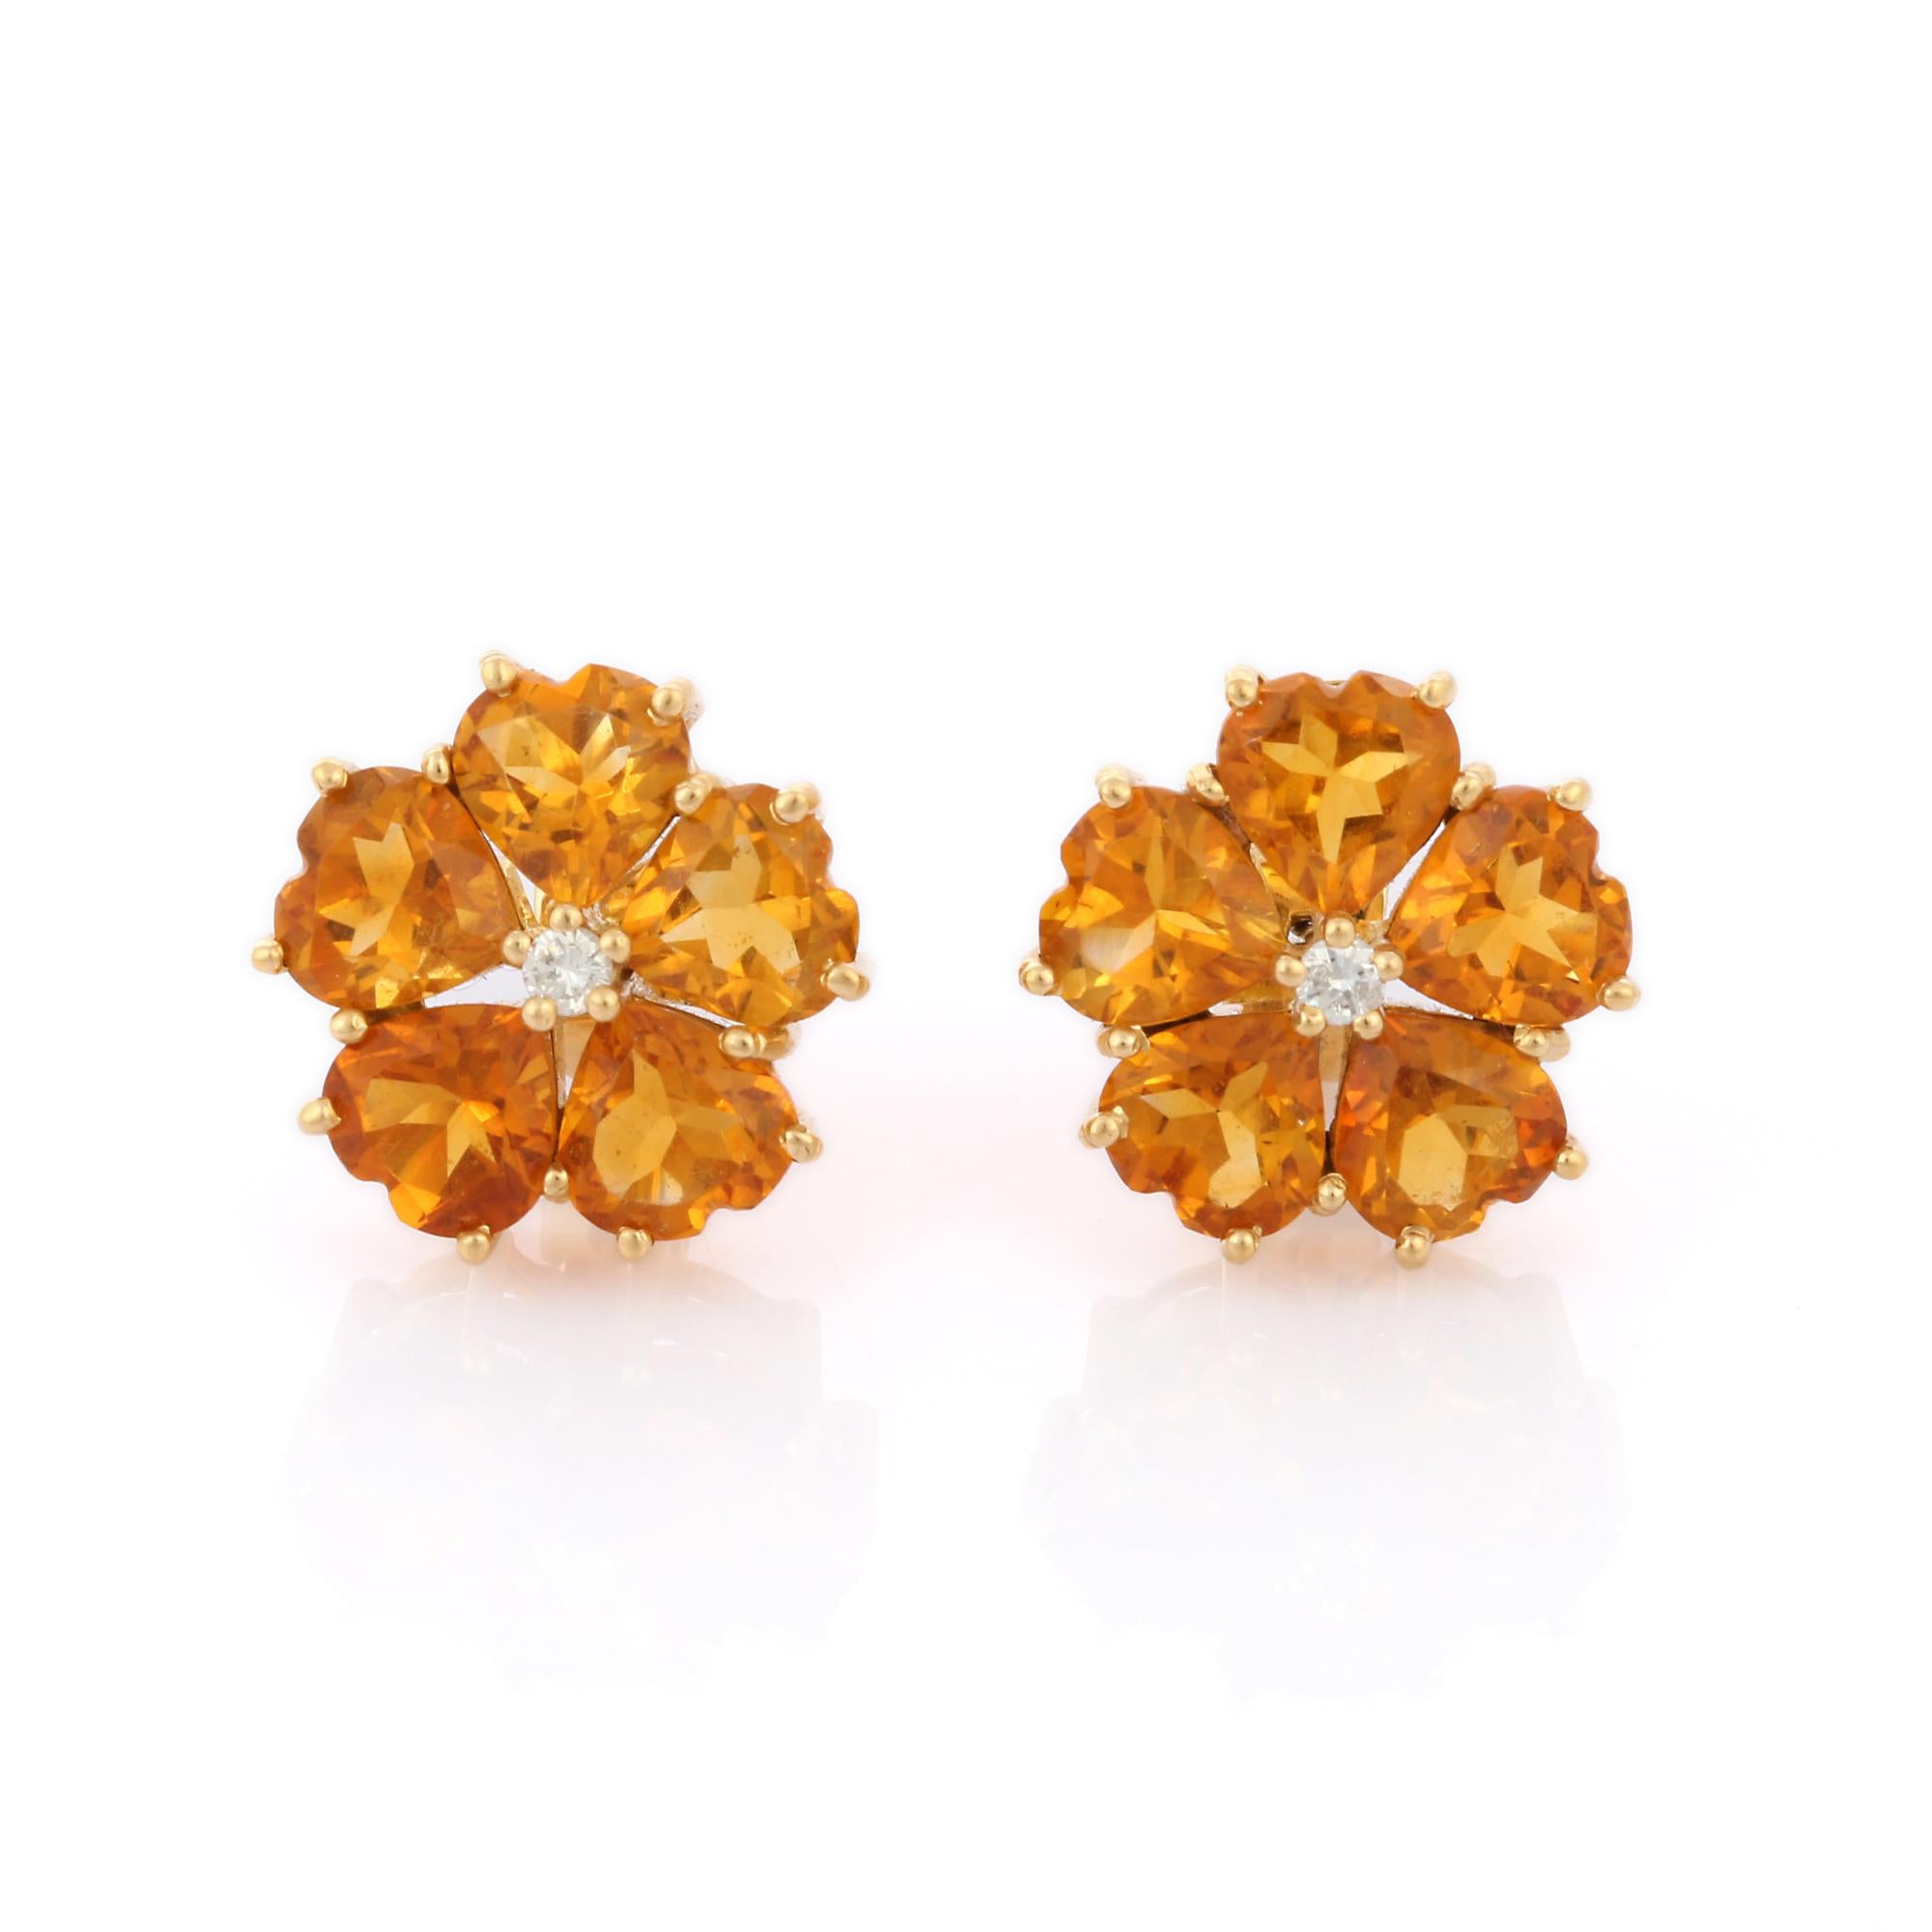 Women's Heart Cut 6.5 ct Citrine Floral Stud Earrings with Diamonds in 18K Yellow Gold For Sale